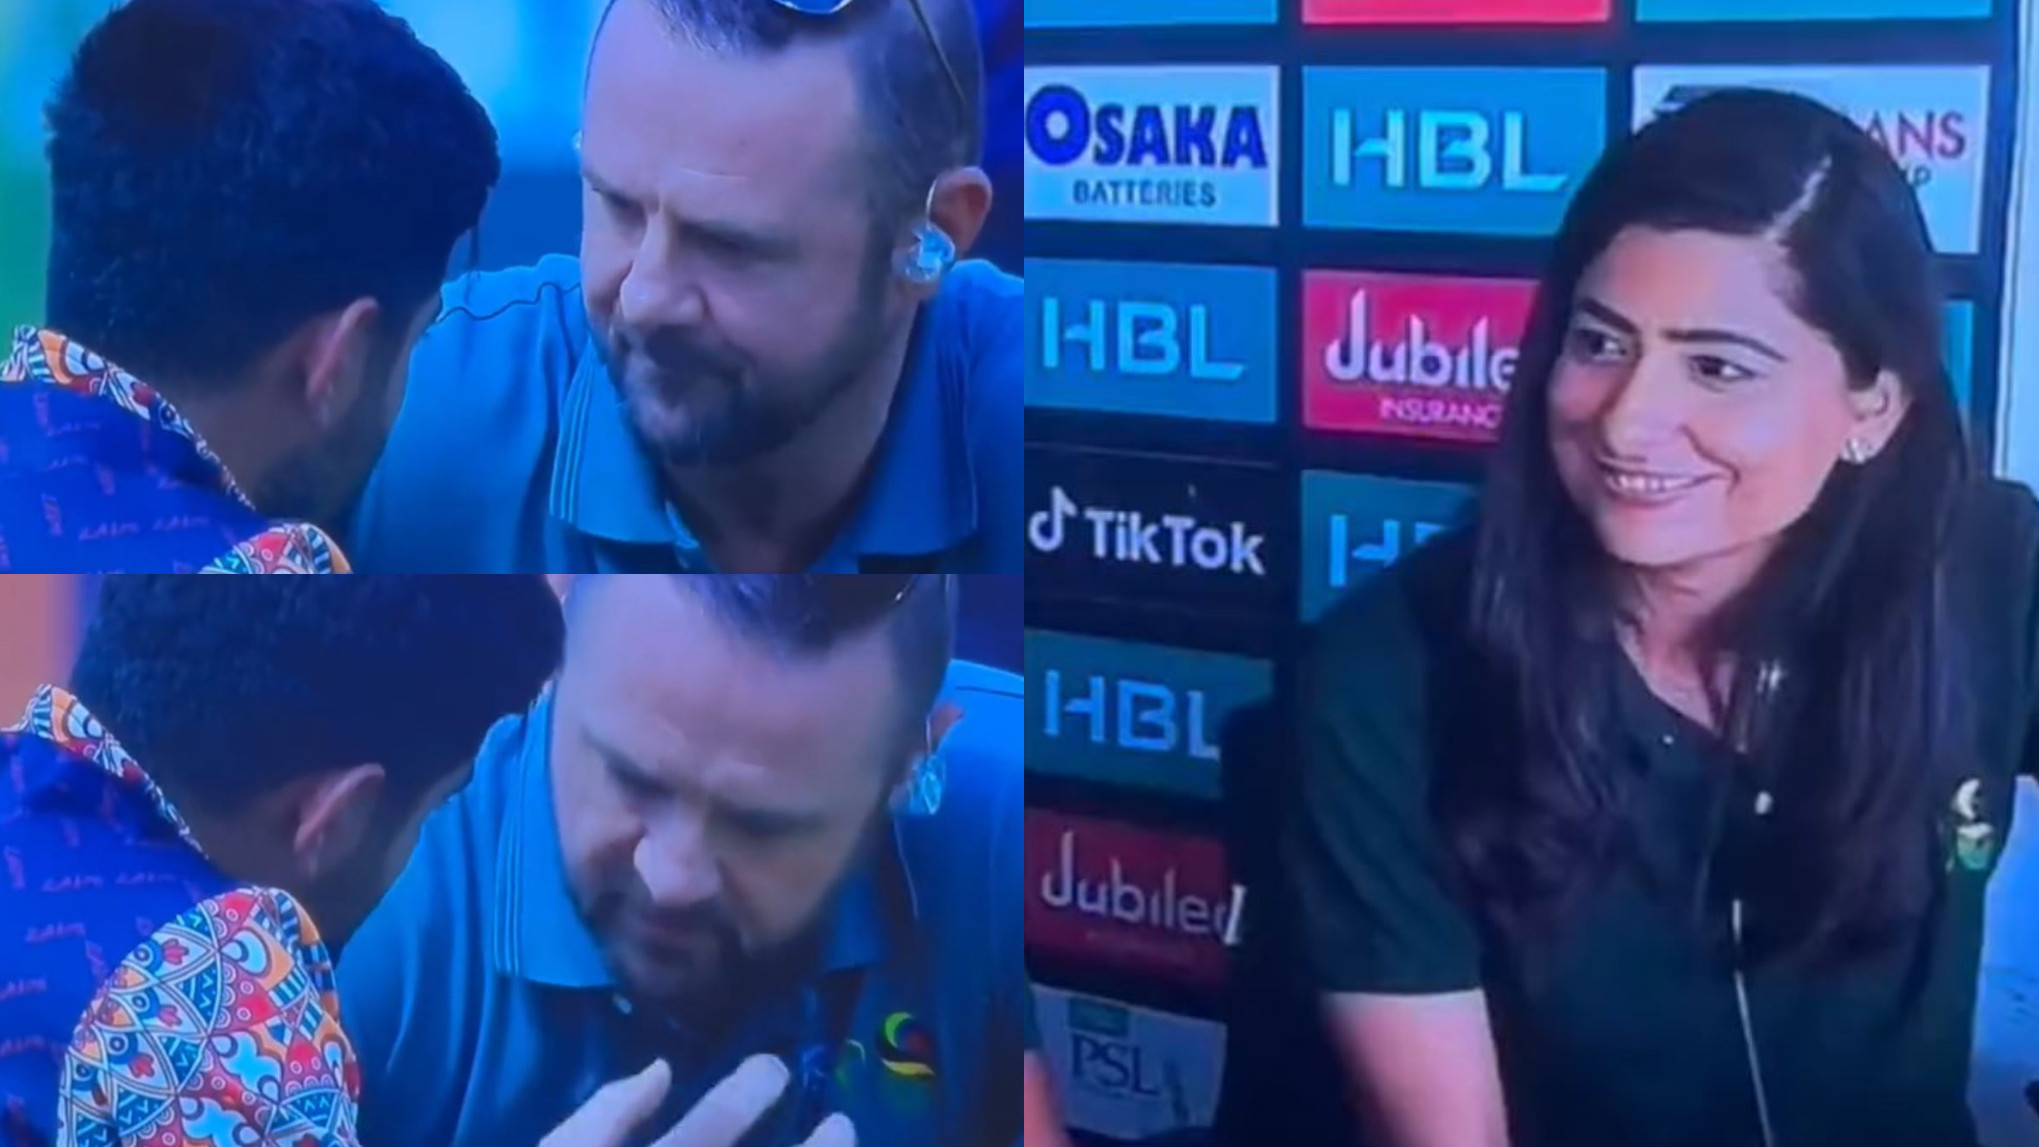 PSL 2023: WATCH- Simon Doull chats with Babar Azam during Zalmi v Islamabad match; Sana Mir takes a dig